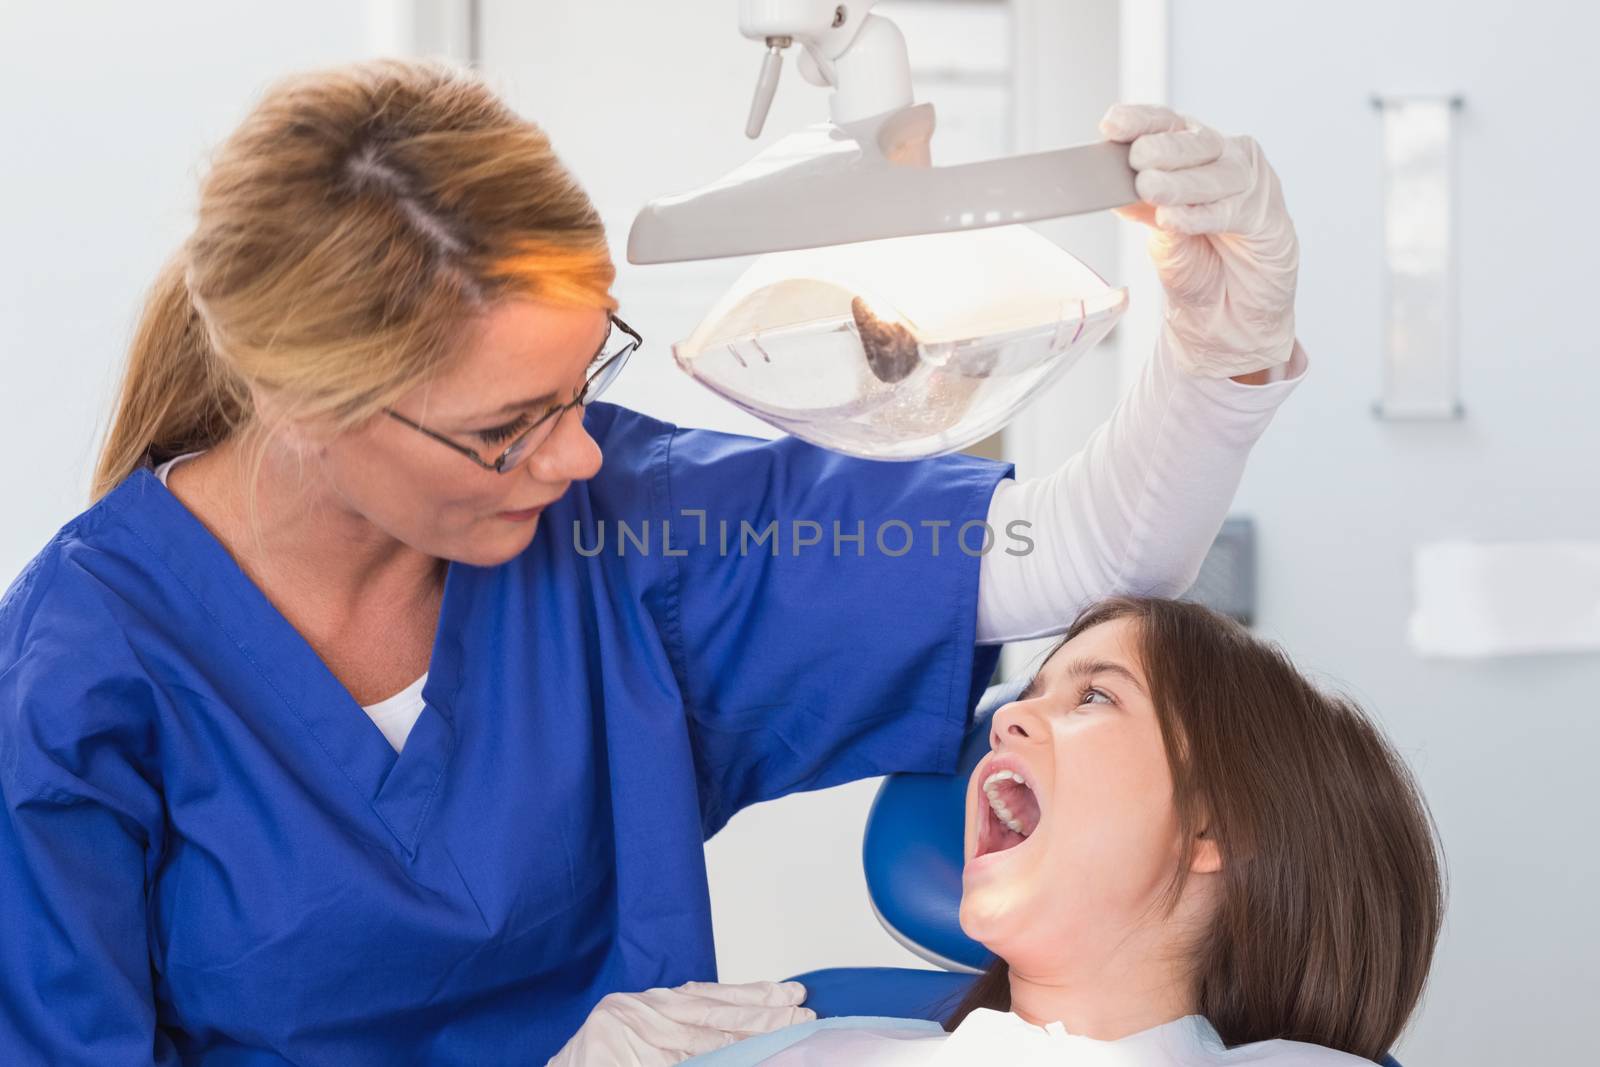 Pediatric dentist examining with a light her young patient  by Wavebreakmedia